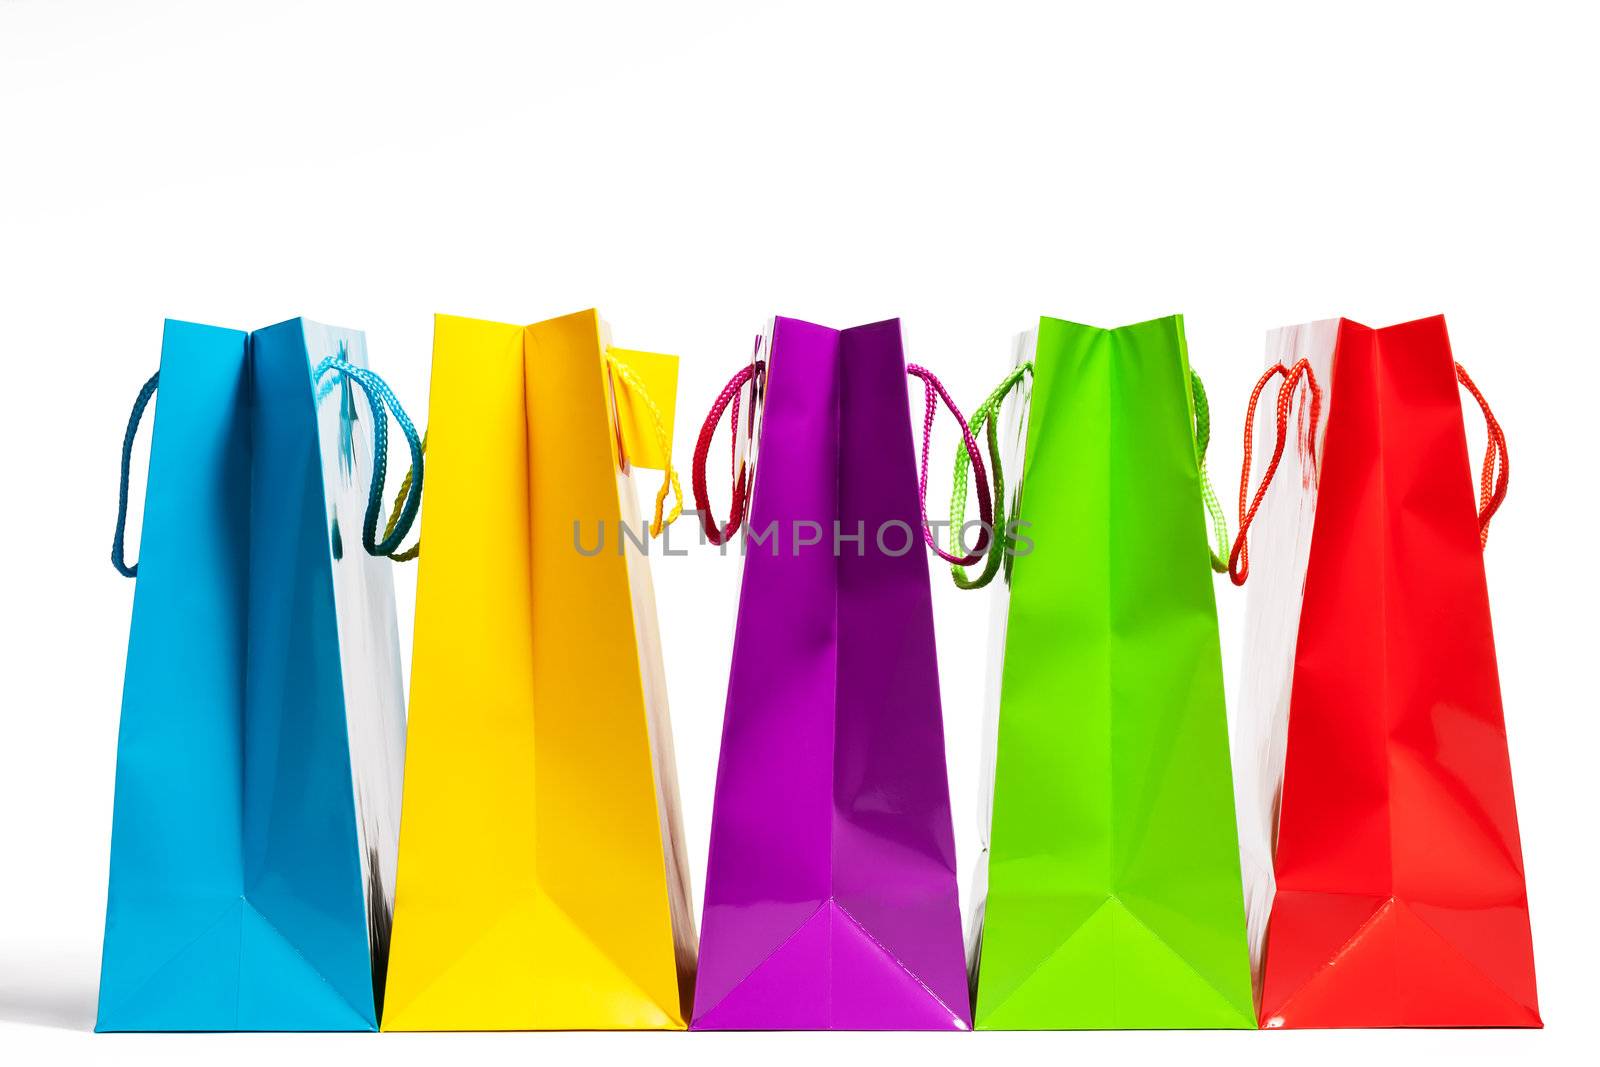 four shopping bags in a row on white background